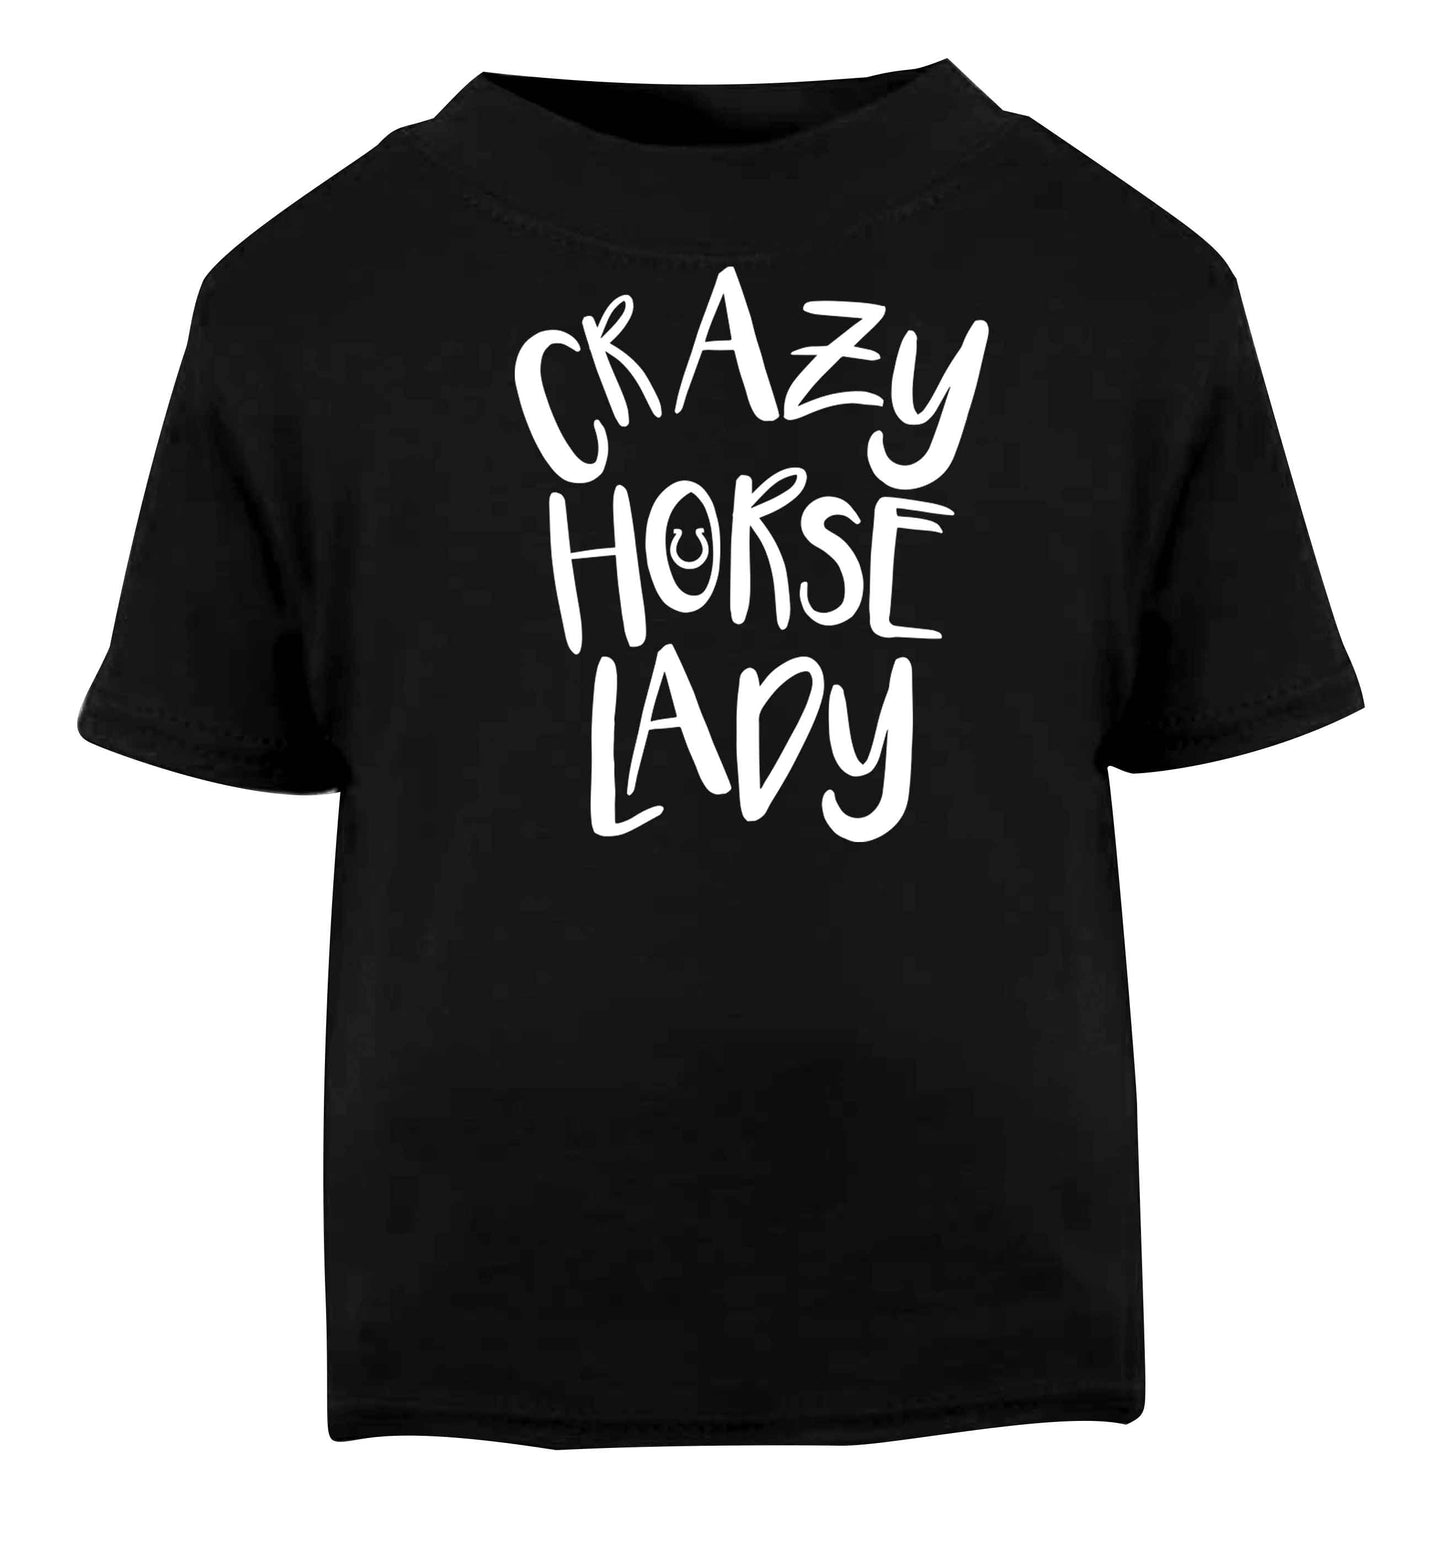 Crazy horse lady Black baby toddler Tshirt 2 years